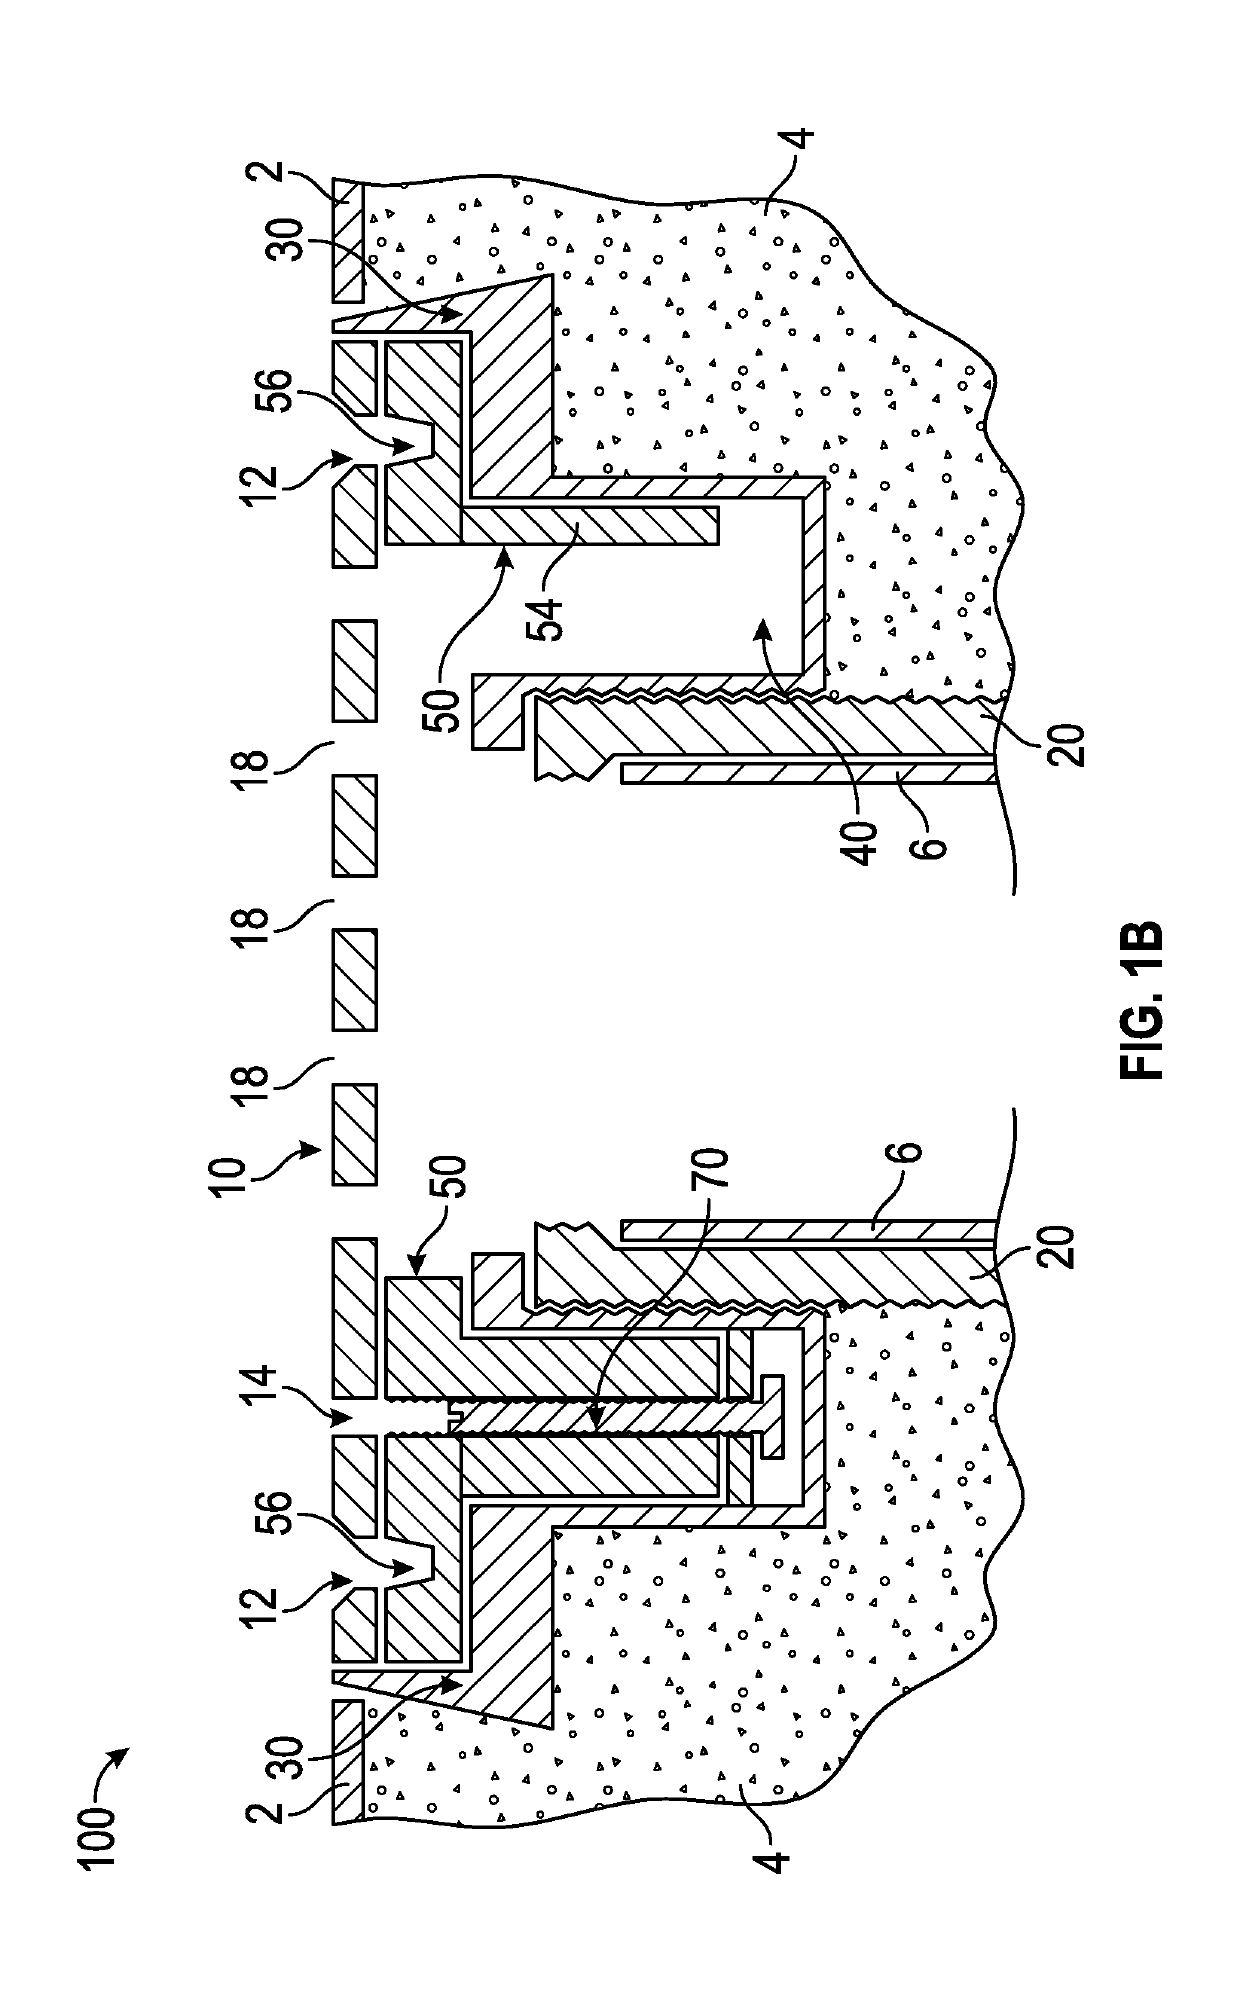 Drain and drain leveling mechanism